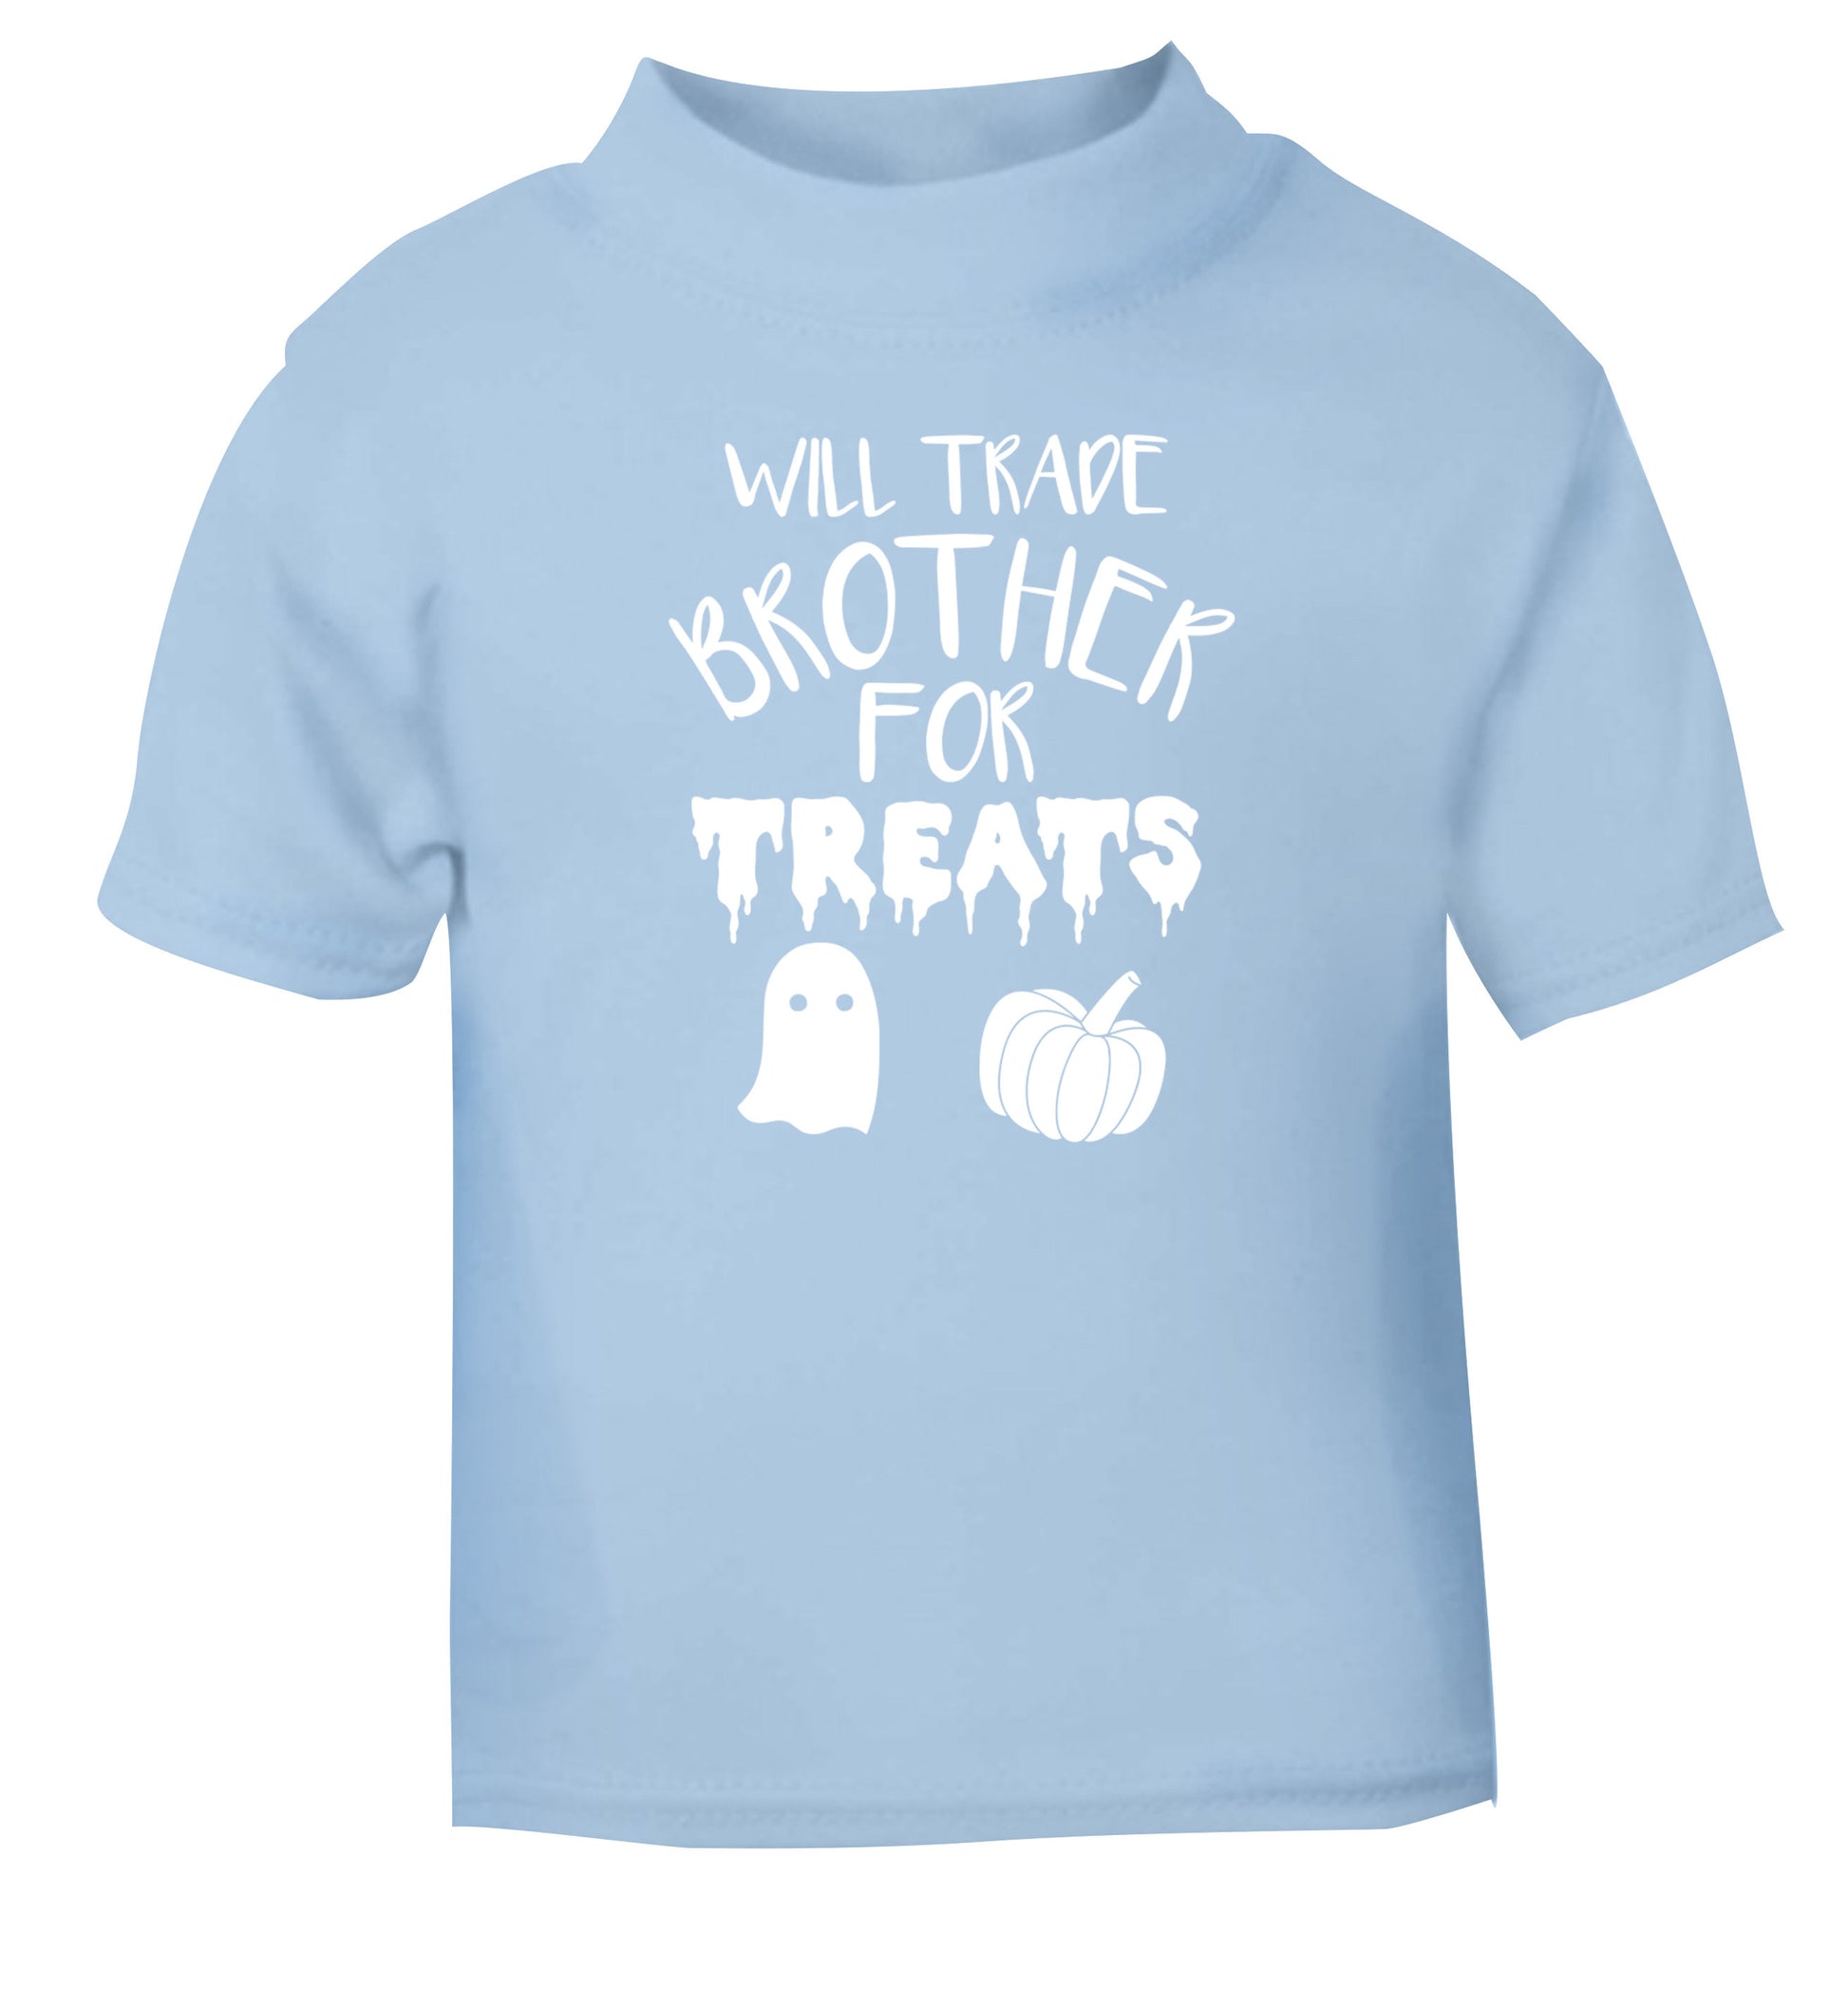 Will trade brother for treats light blue Baby Toddler Tshirt 2 Years